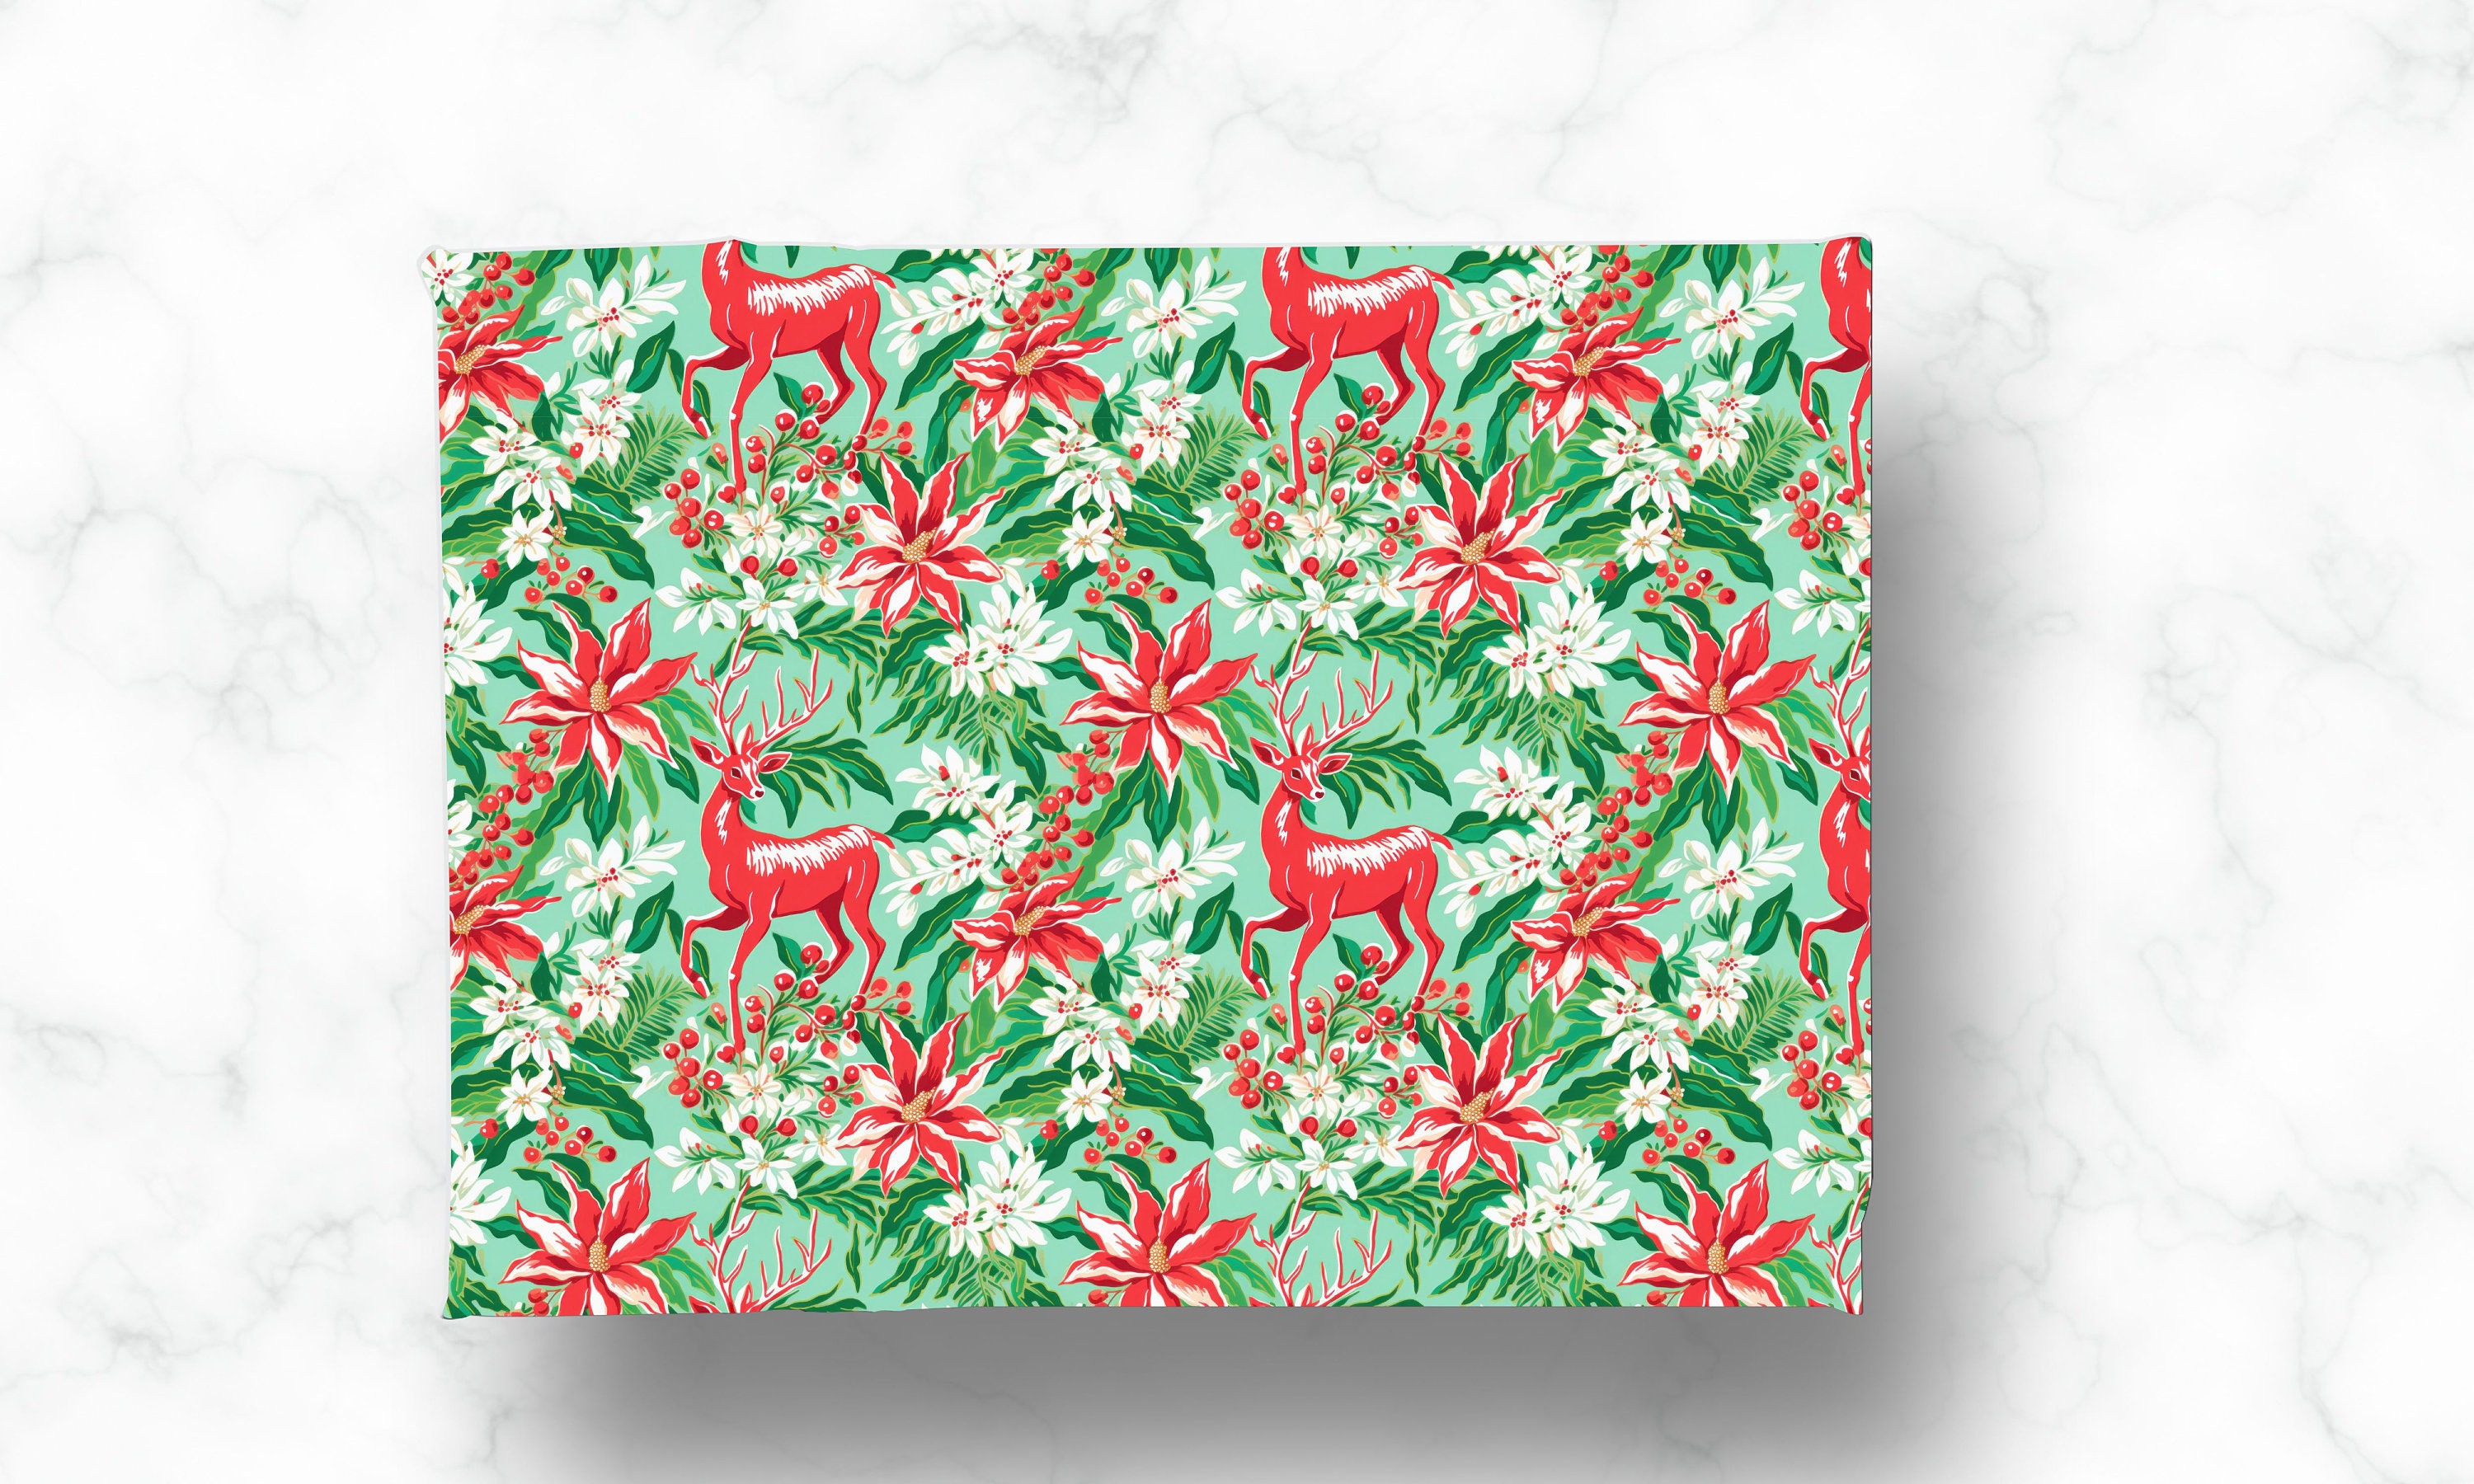 Preppy Christmas Wrapping Paper: Red and Green Ornaments gift Wrap